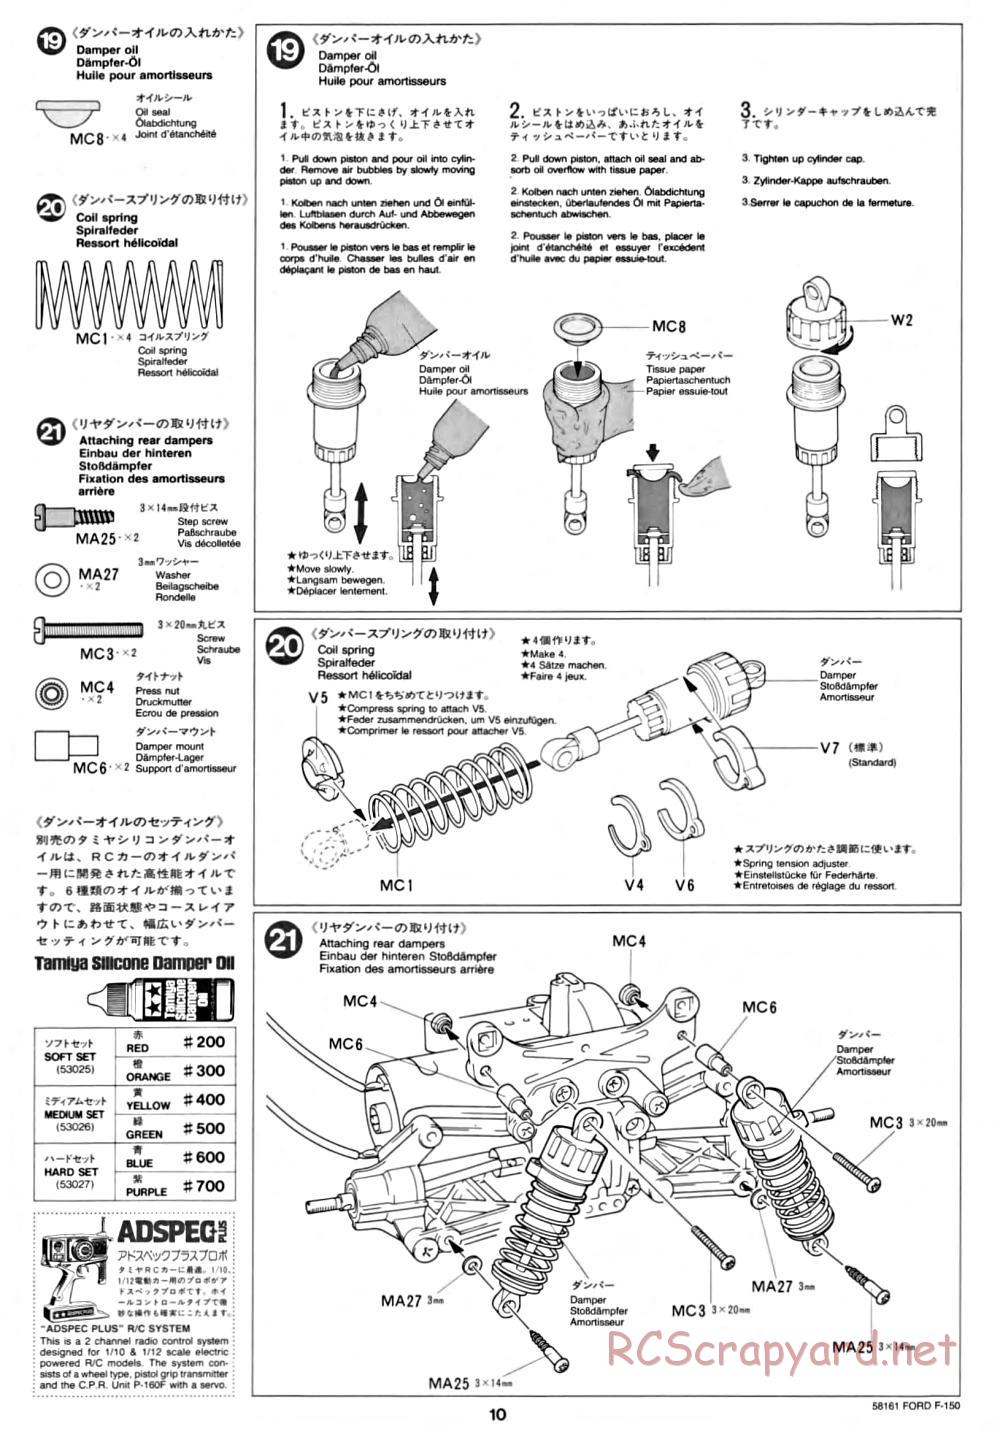 Tamiya - Ford F-150 Truck Chassis - Manual - Page 10